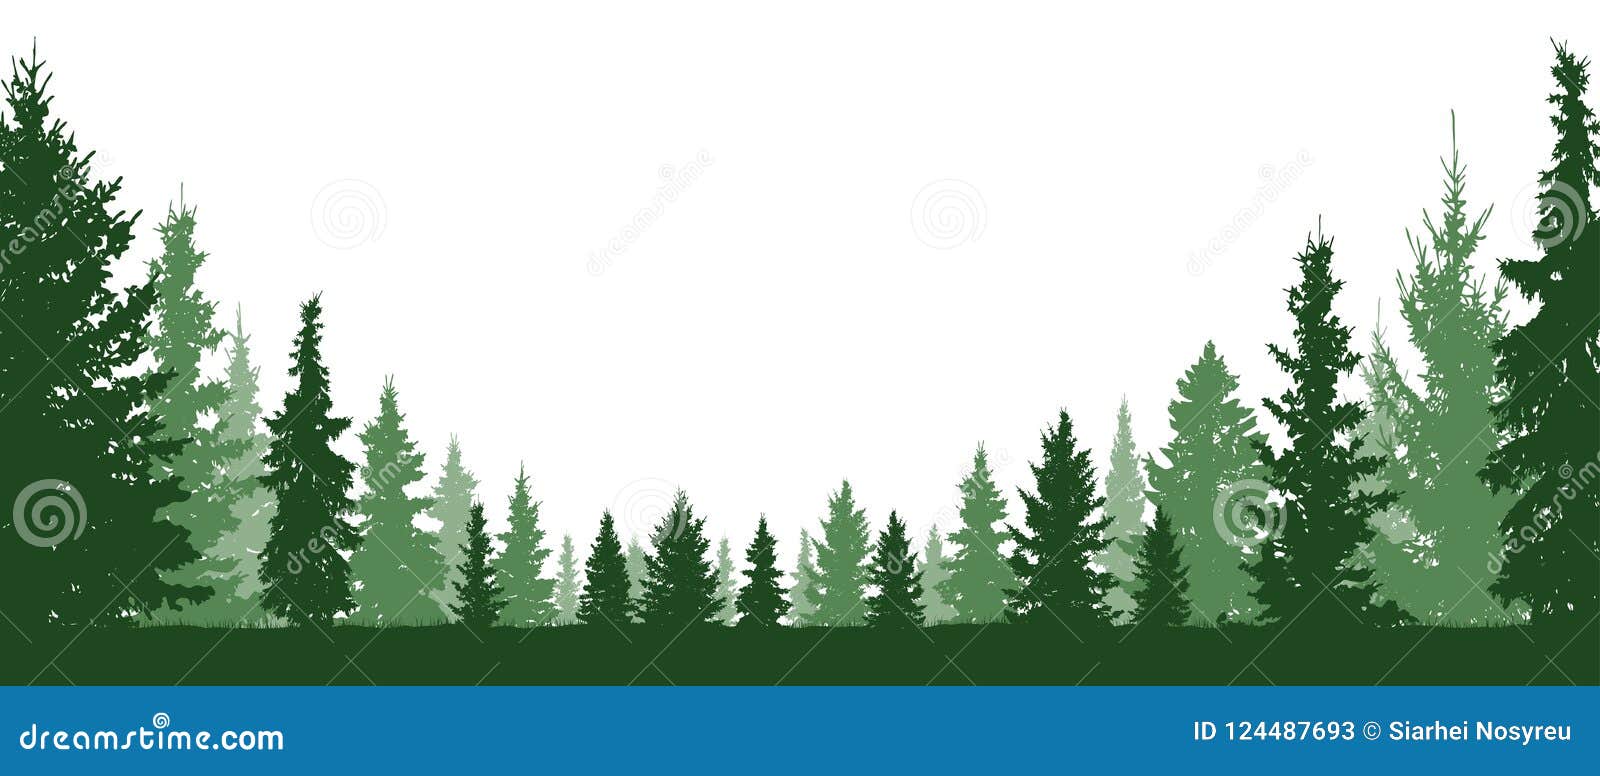 forest evergreen, coniferous trees, silhouette  background.